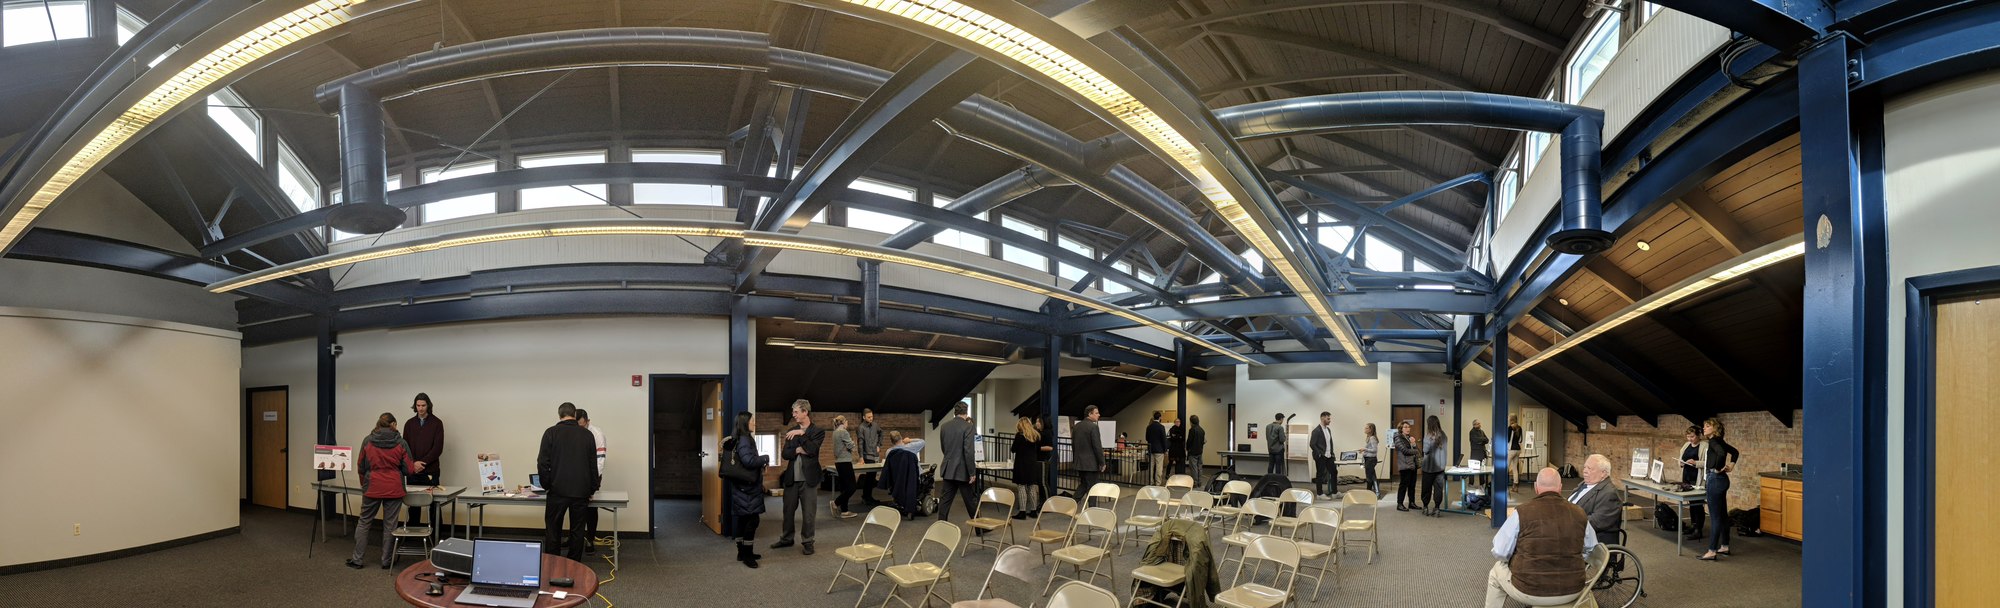 Wide photo of people socializing in conference hall.